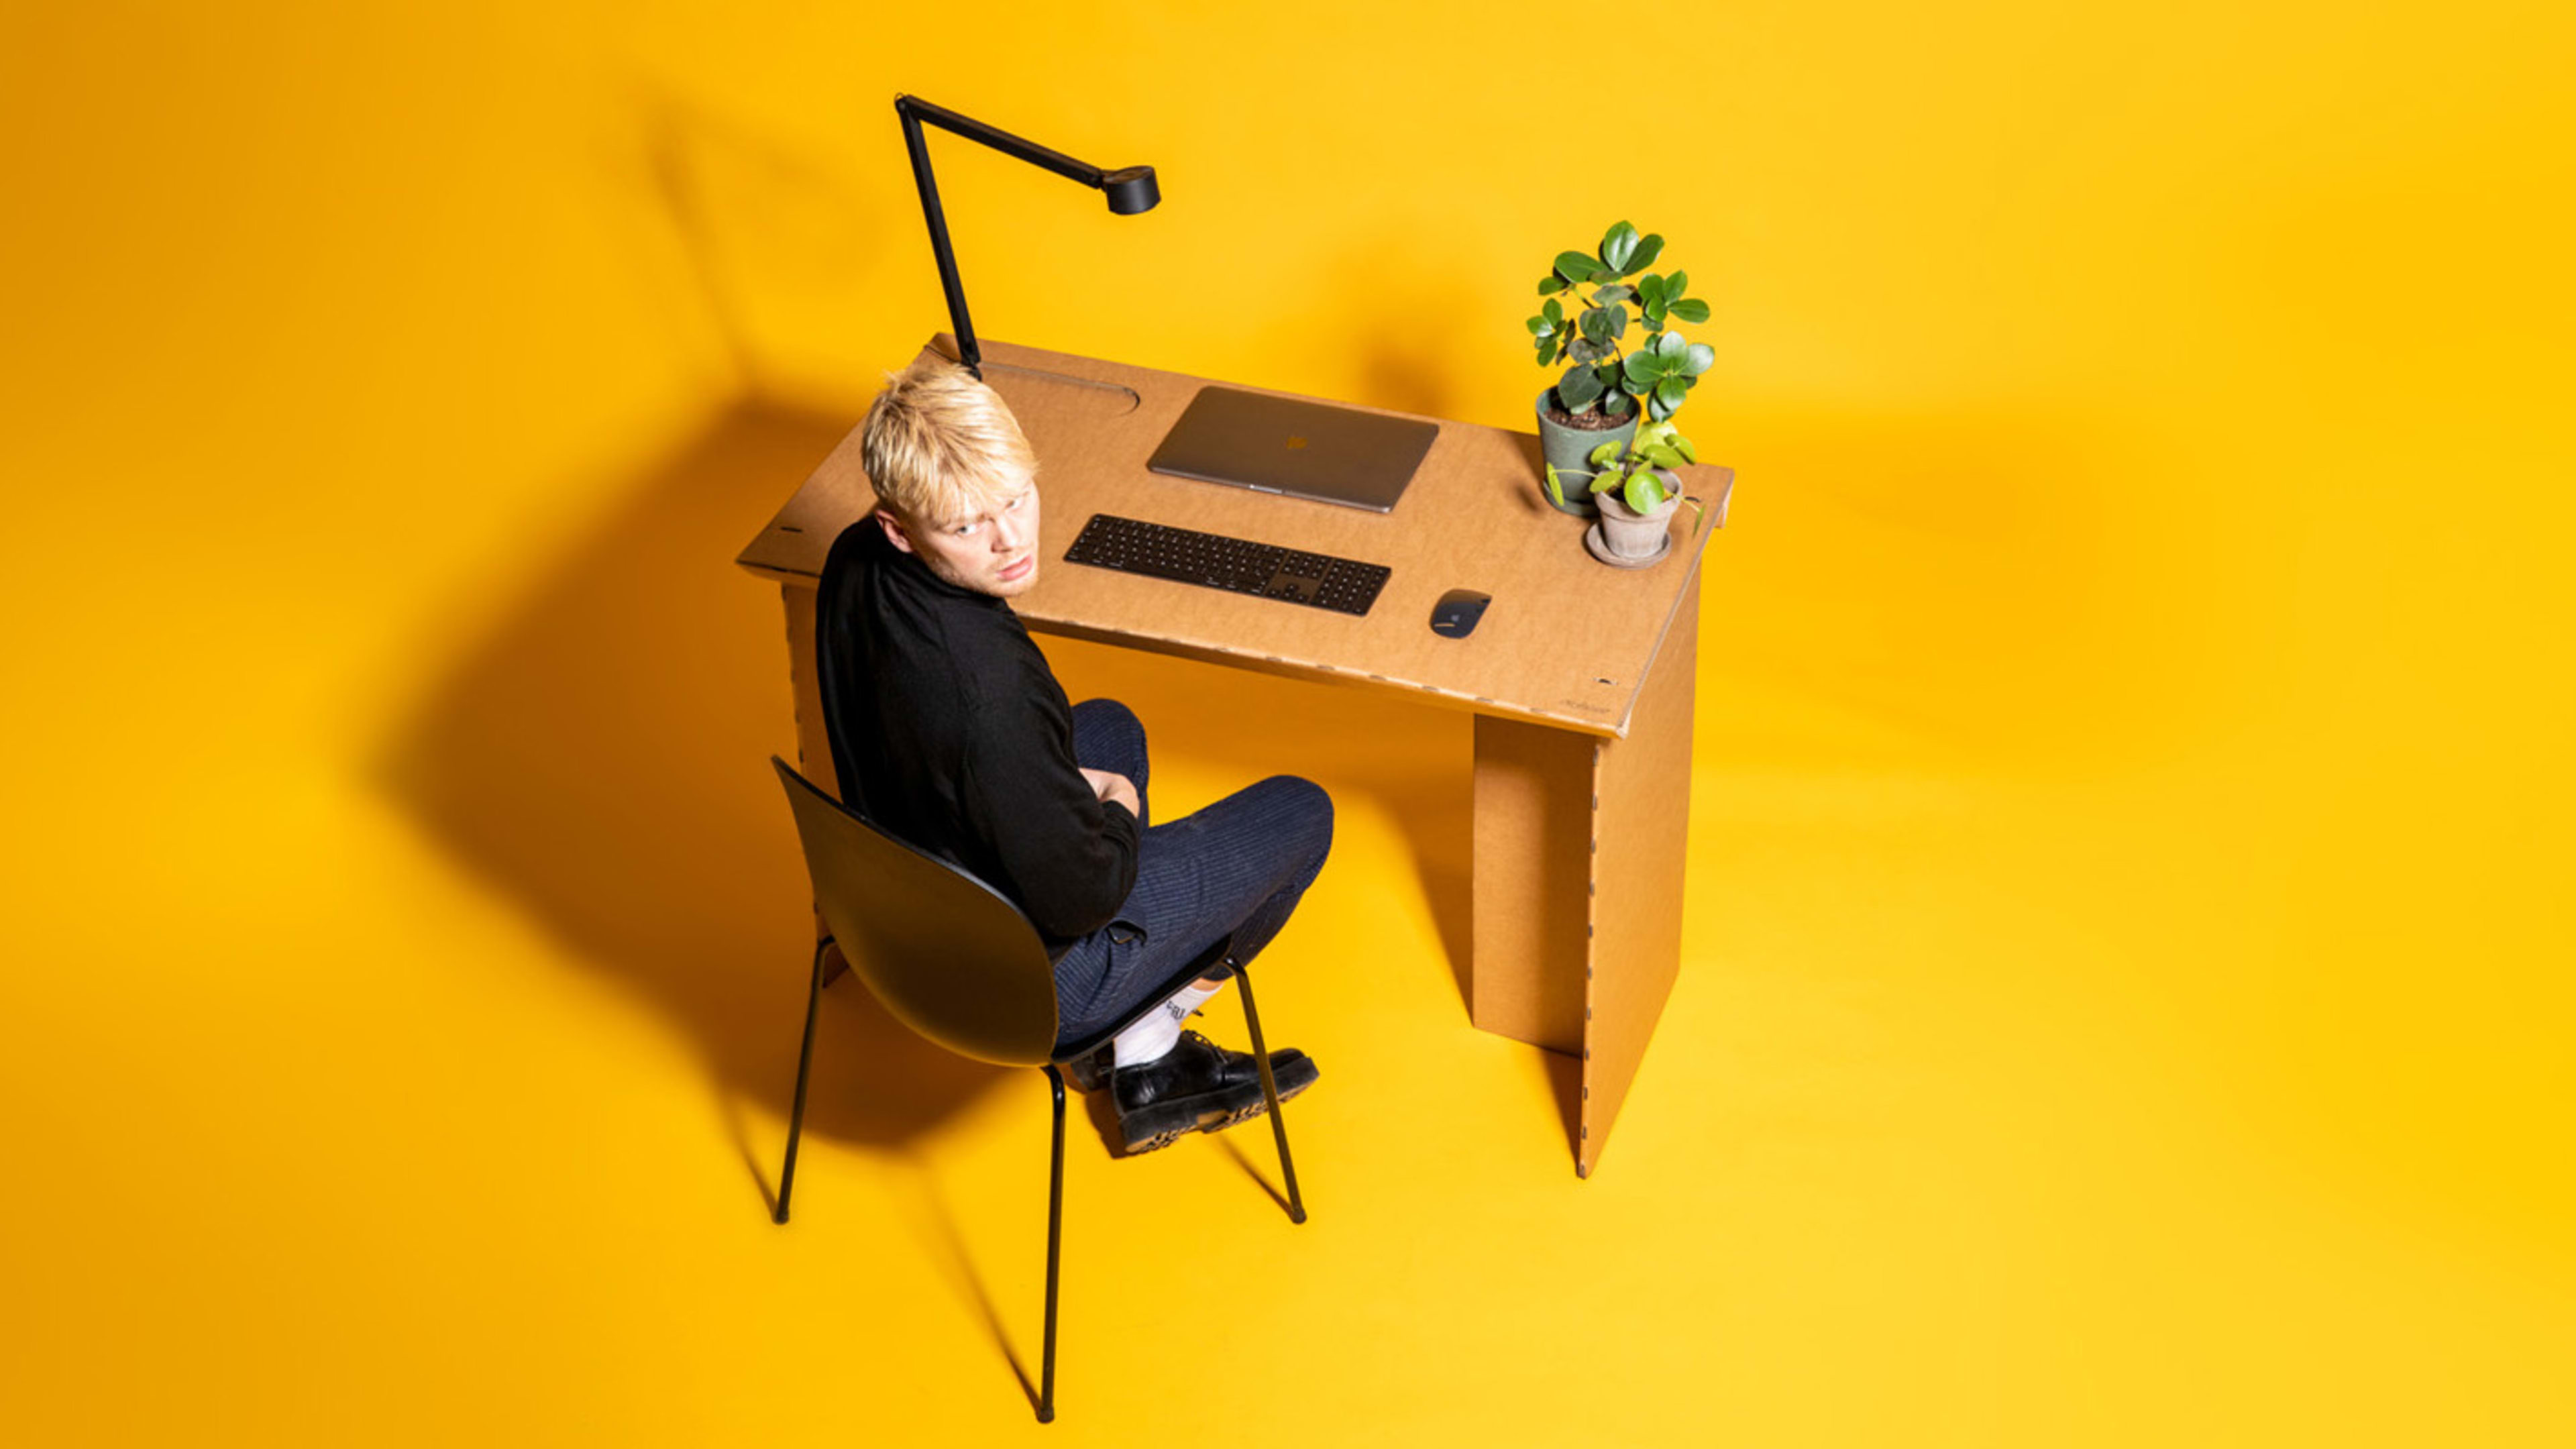 Need a cheap desk to work from home? Try this one made of cardboard